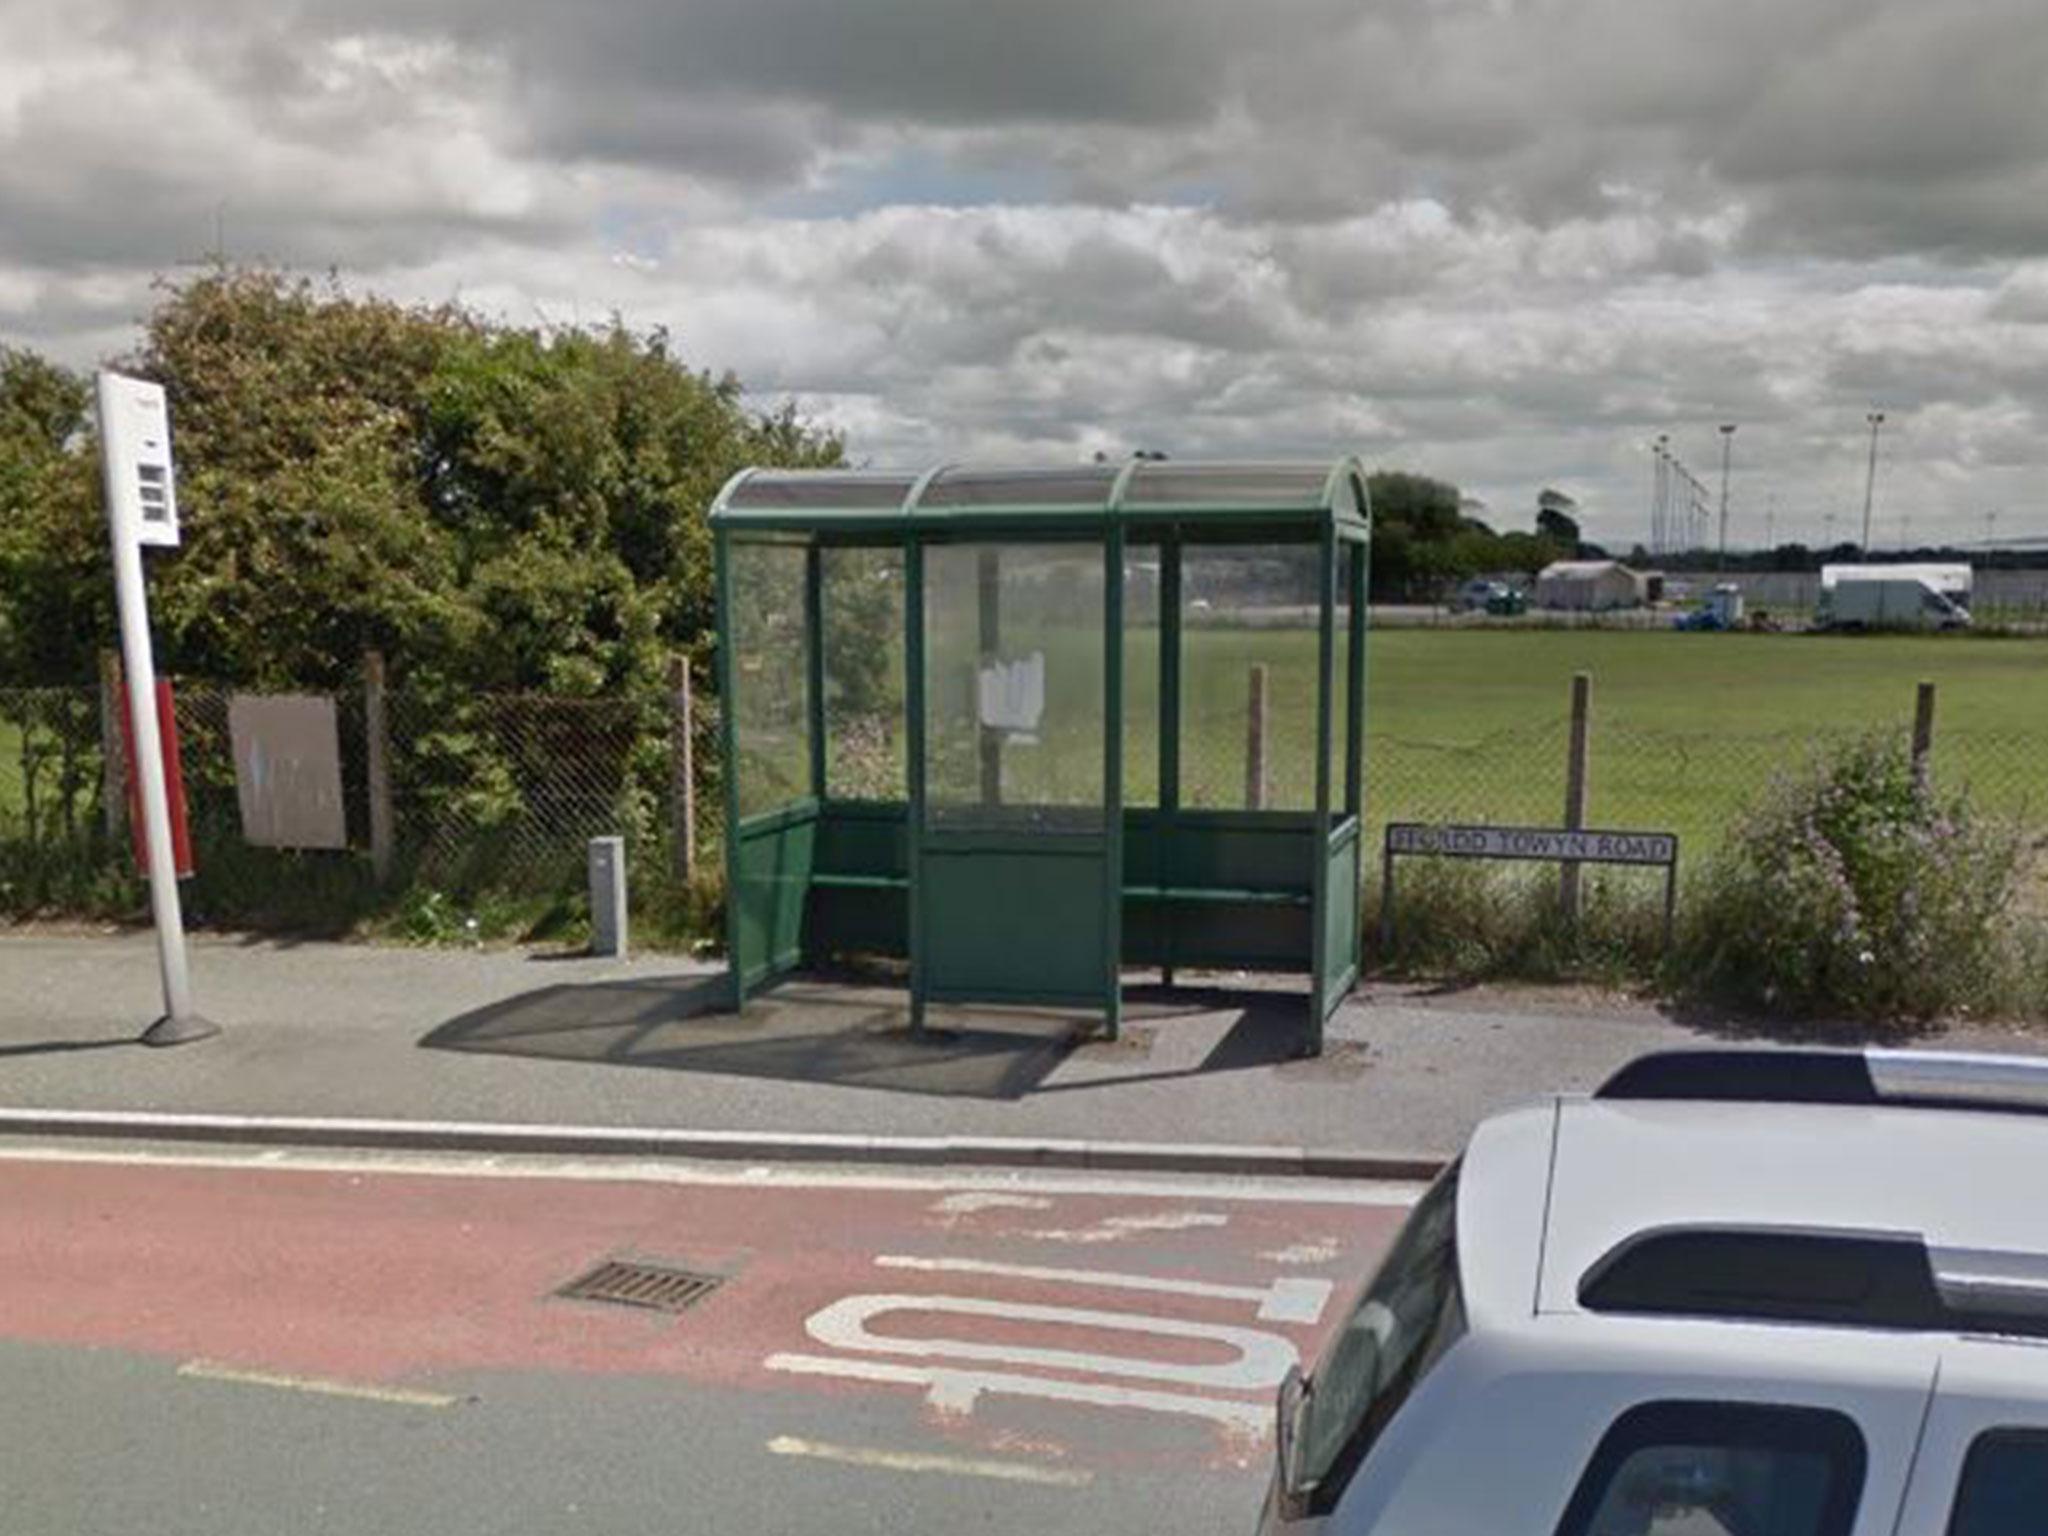 The baby girl was discovered in the bus shelter near a pub in Towyn, North Wales